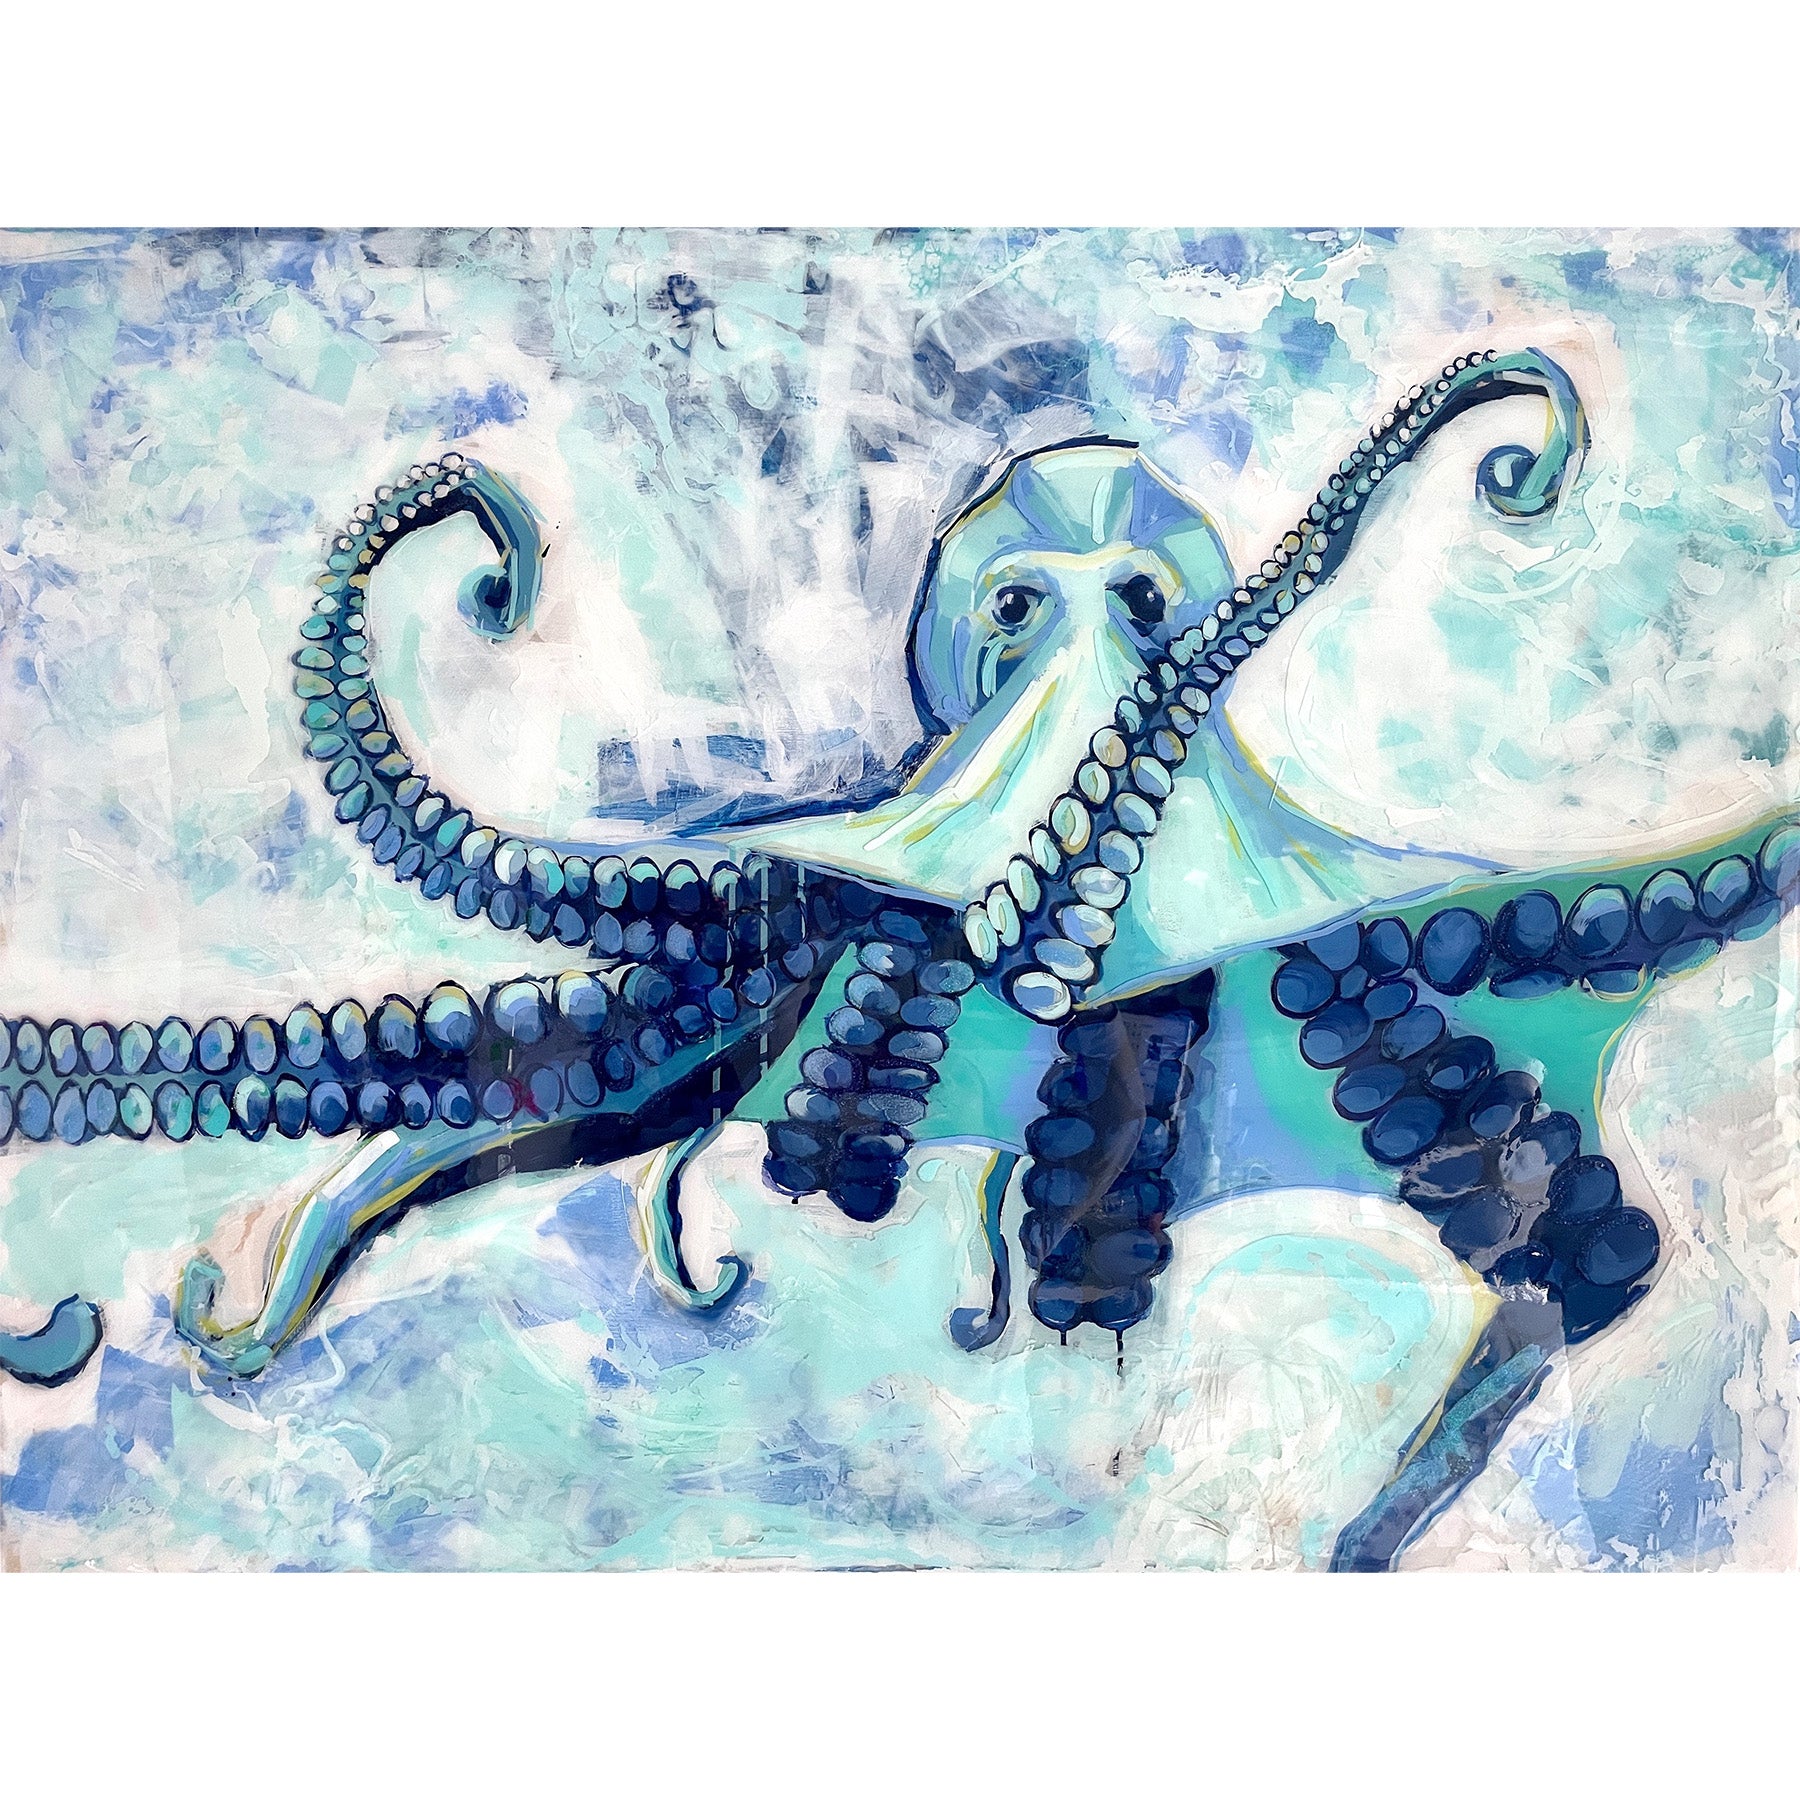 Party Octopus - 36x48 Horizontal Painting with Resin Layers